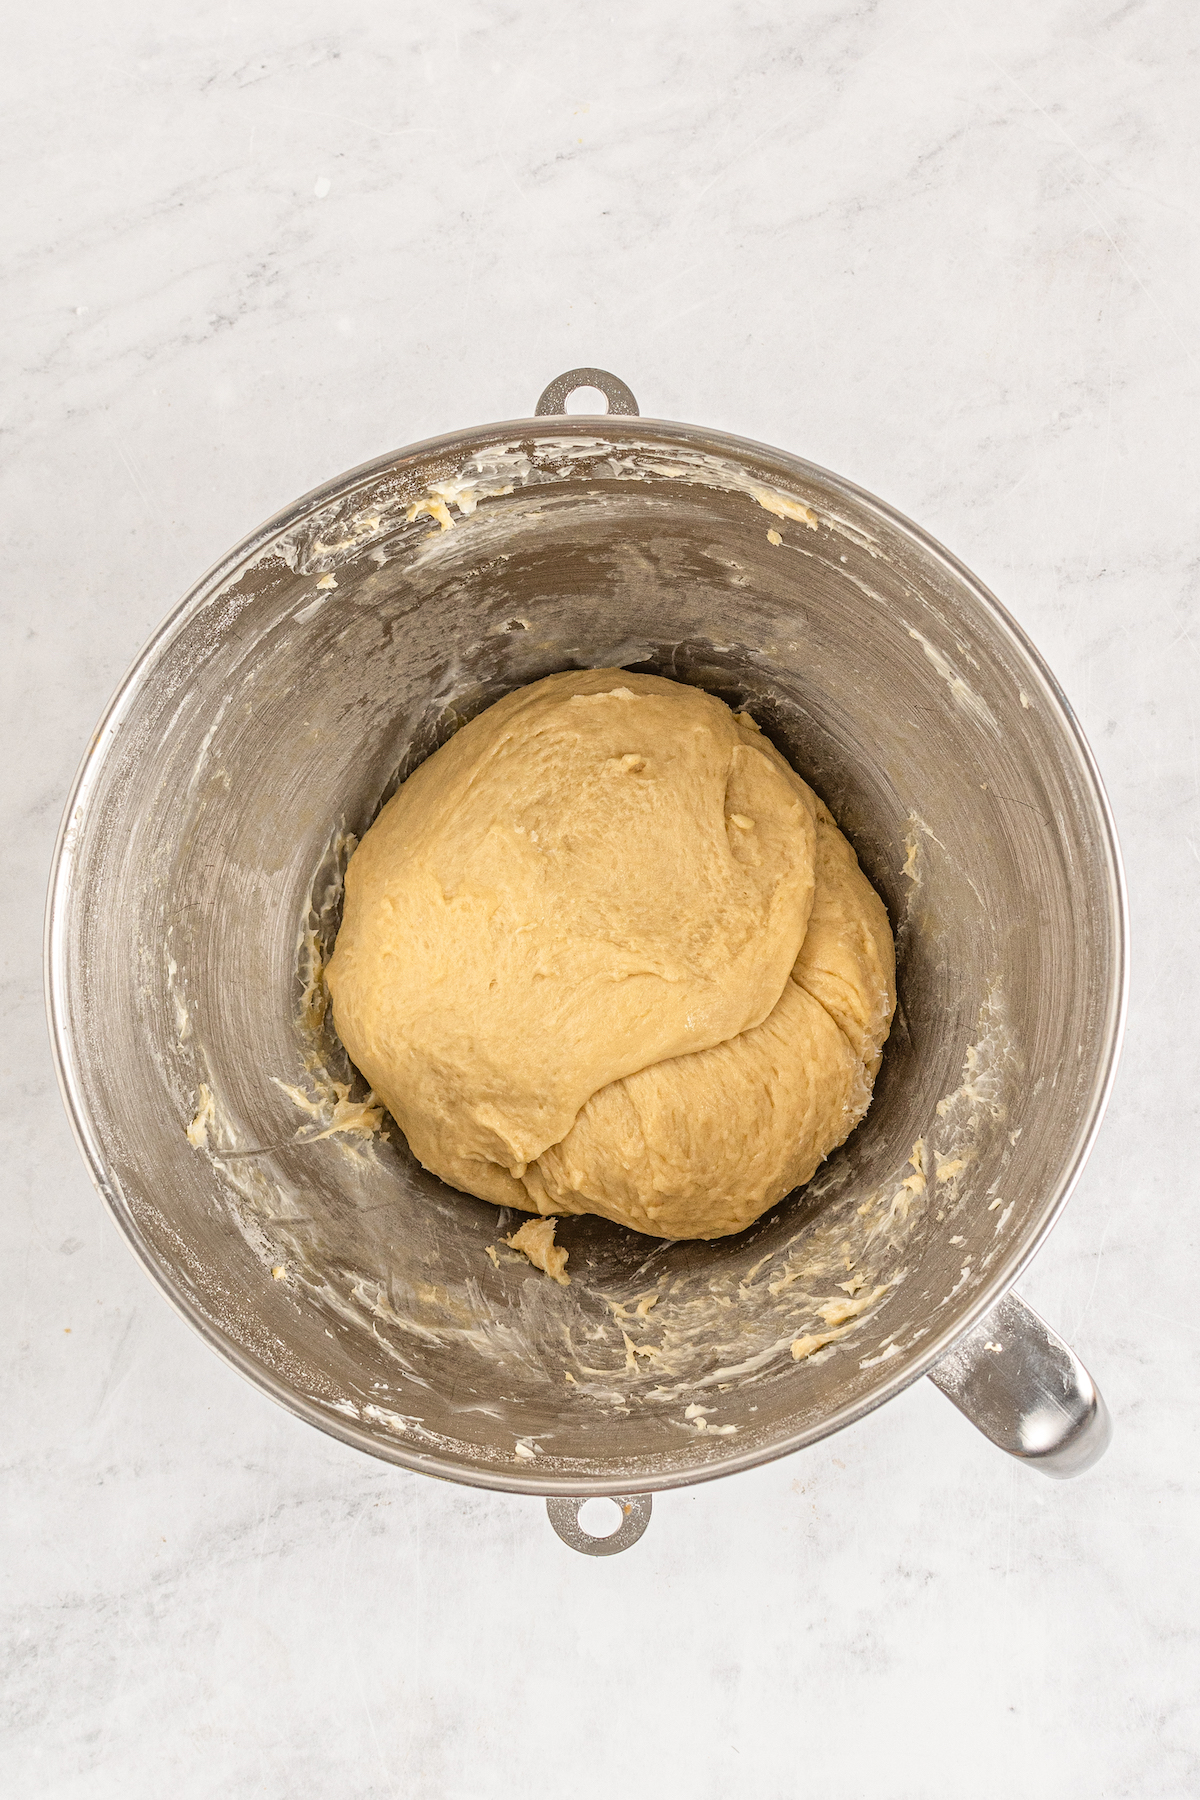 Yeast dough in stand mixer.